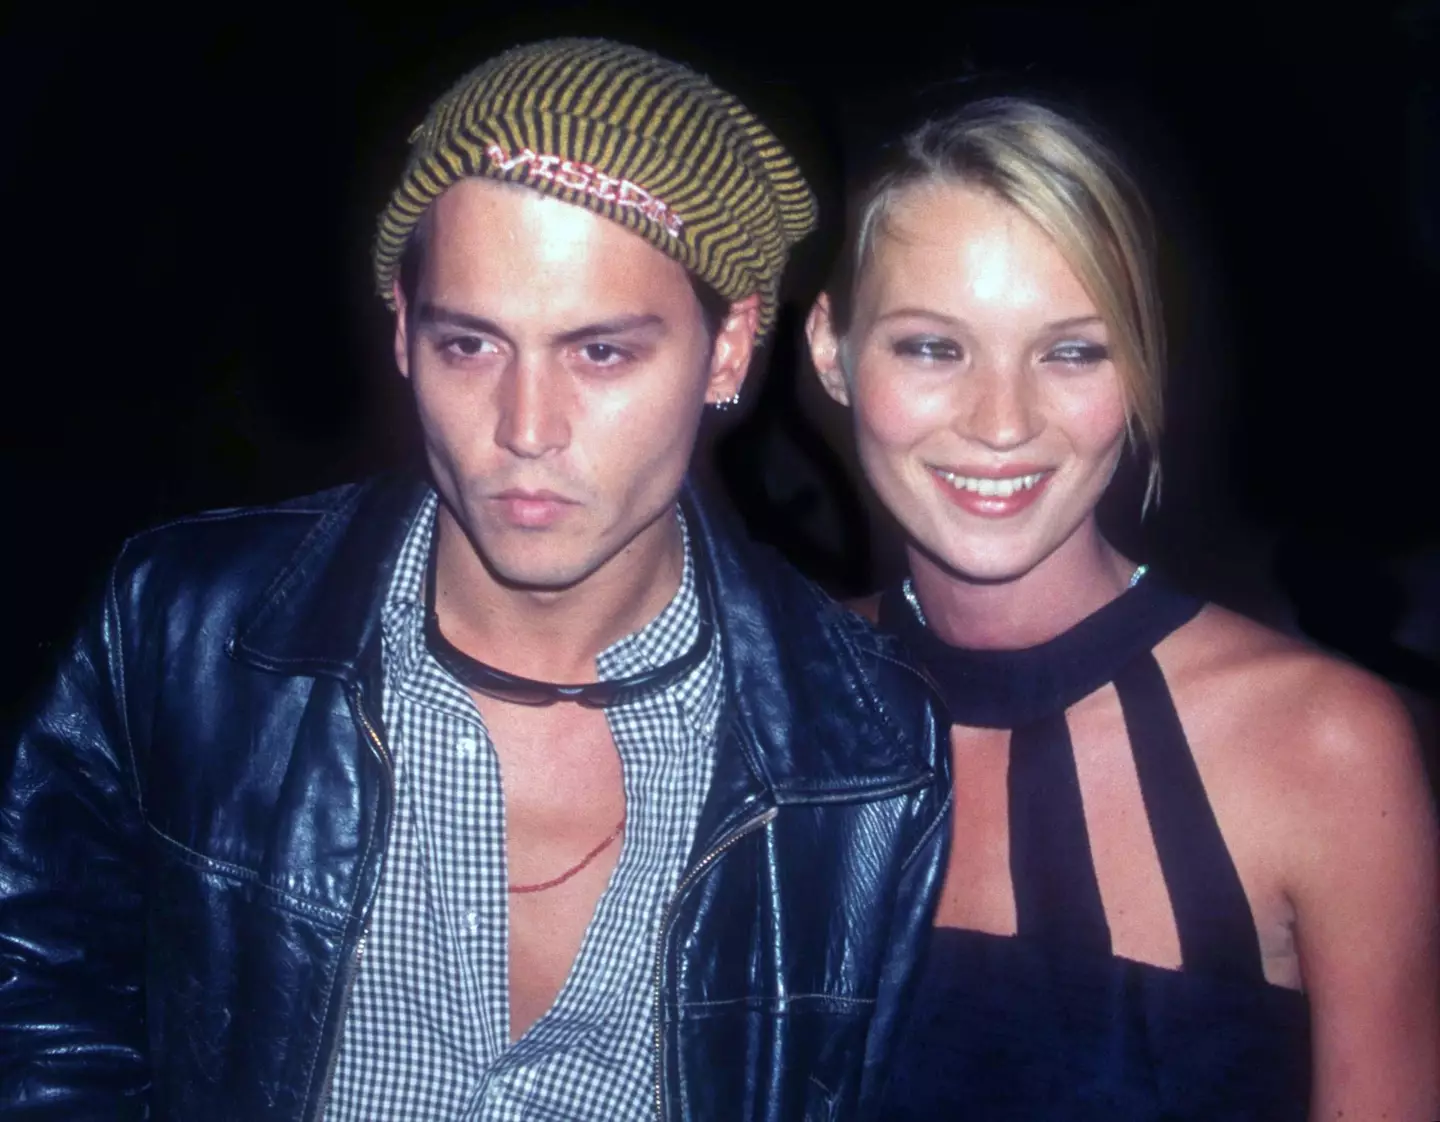 Johnny Depp and Kate Moss in 1995. (